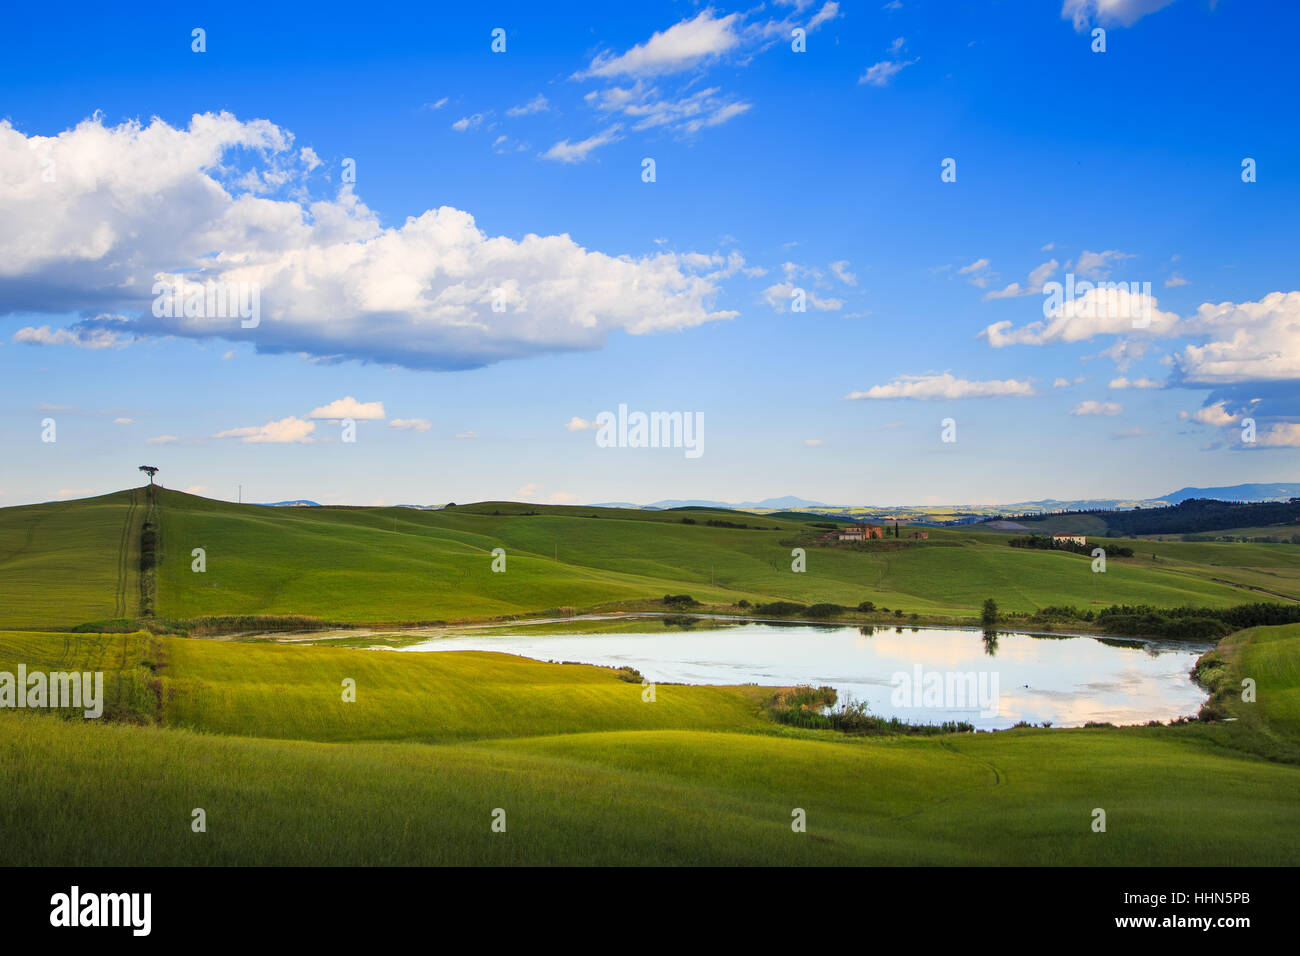 Tuscany, Crete Senesi landscape near Siena, Italy, europe. Small lake, tree on hill and green fields, blue sky with clouds. Stock Photo